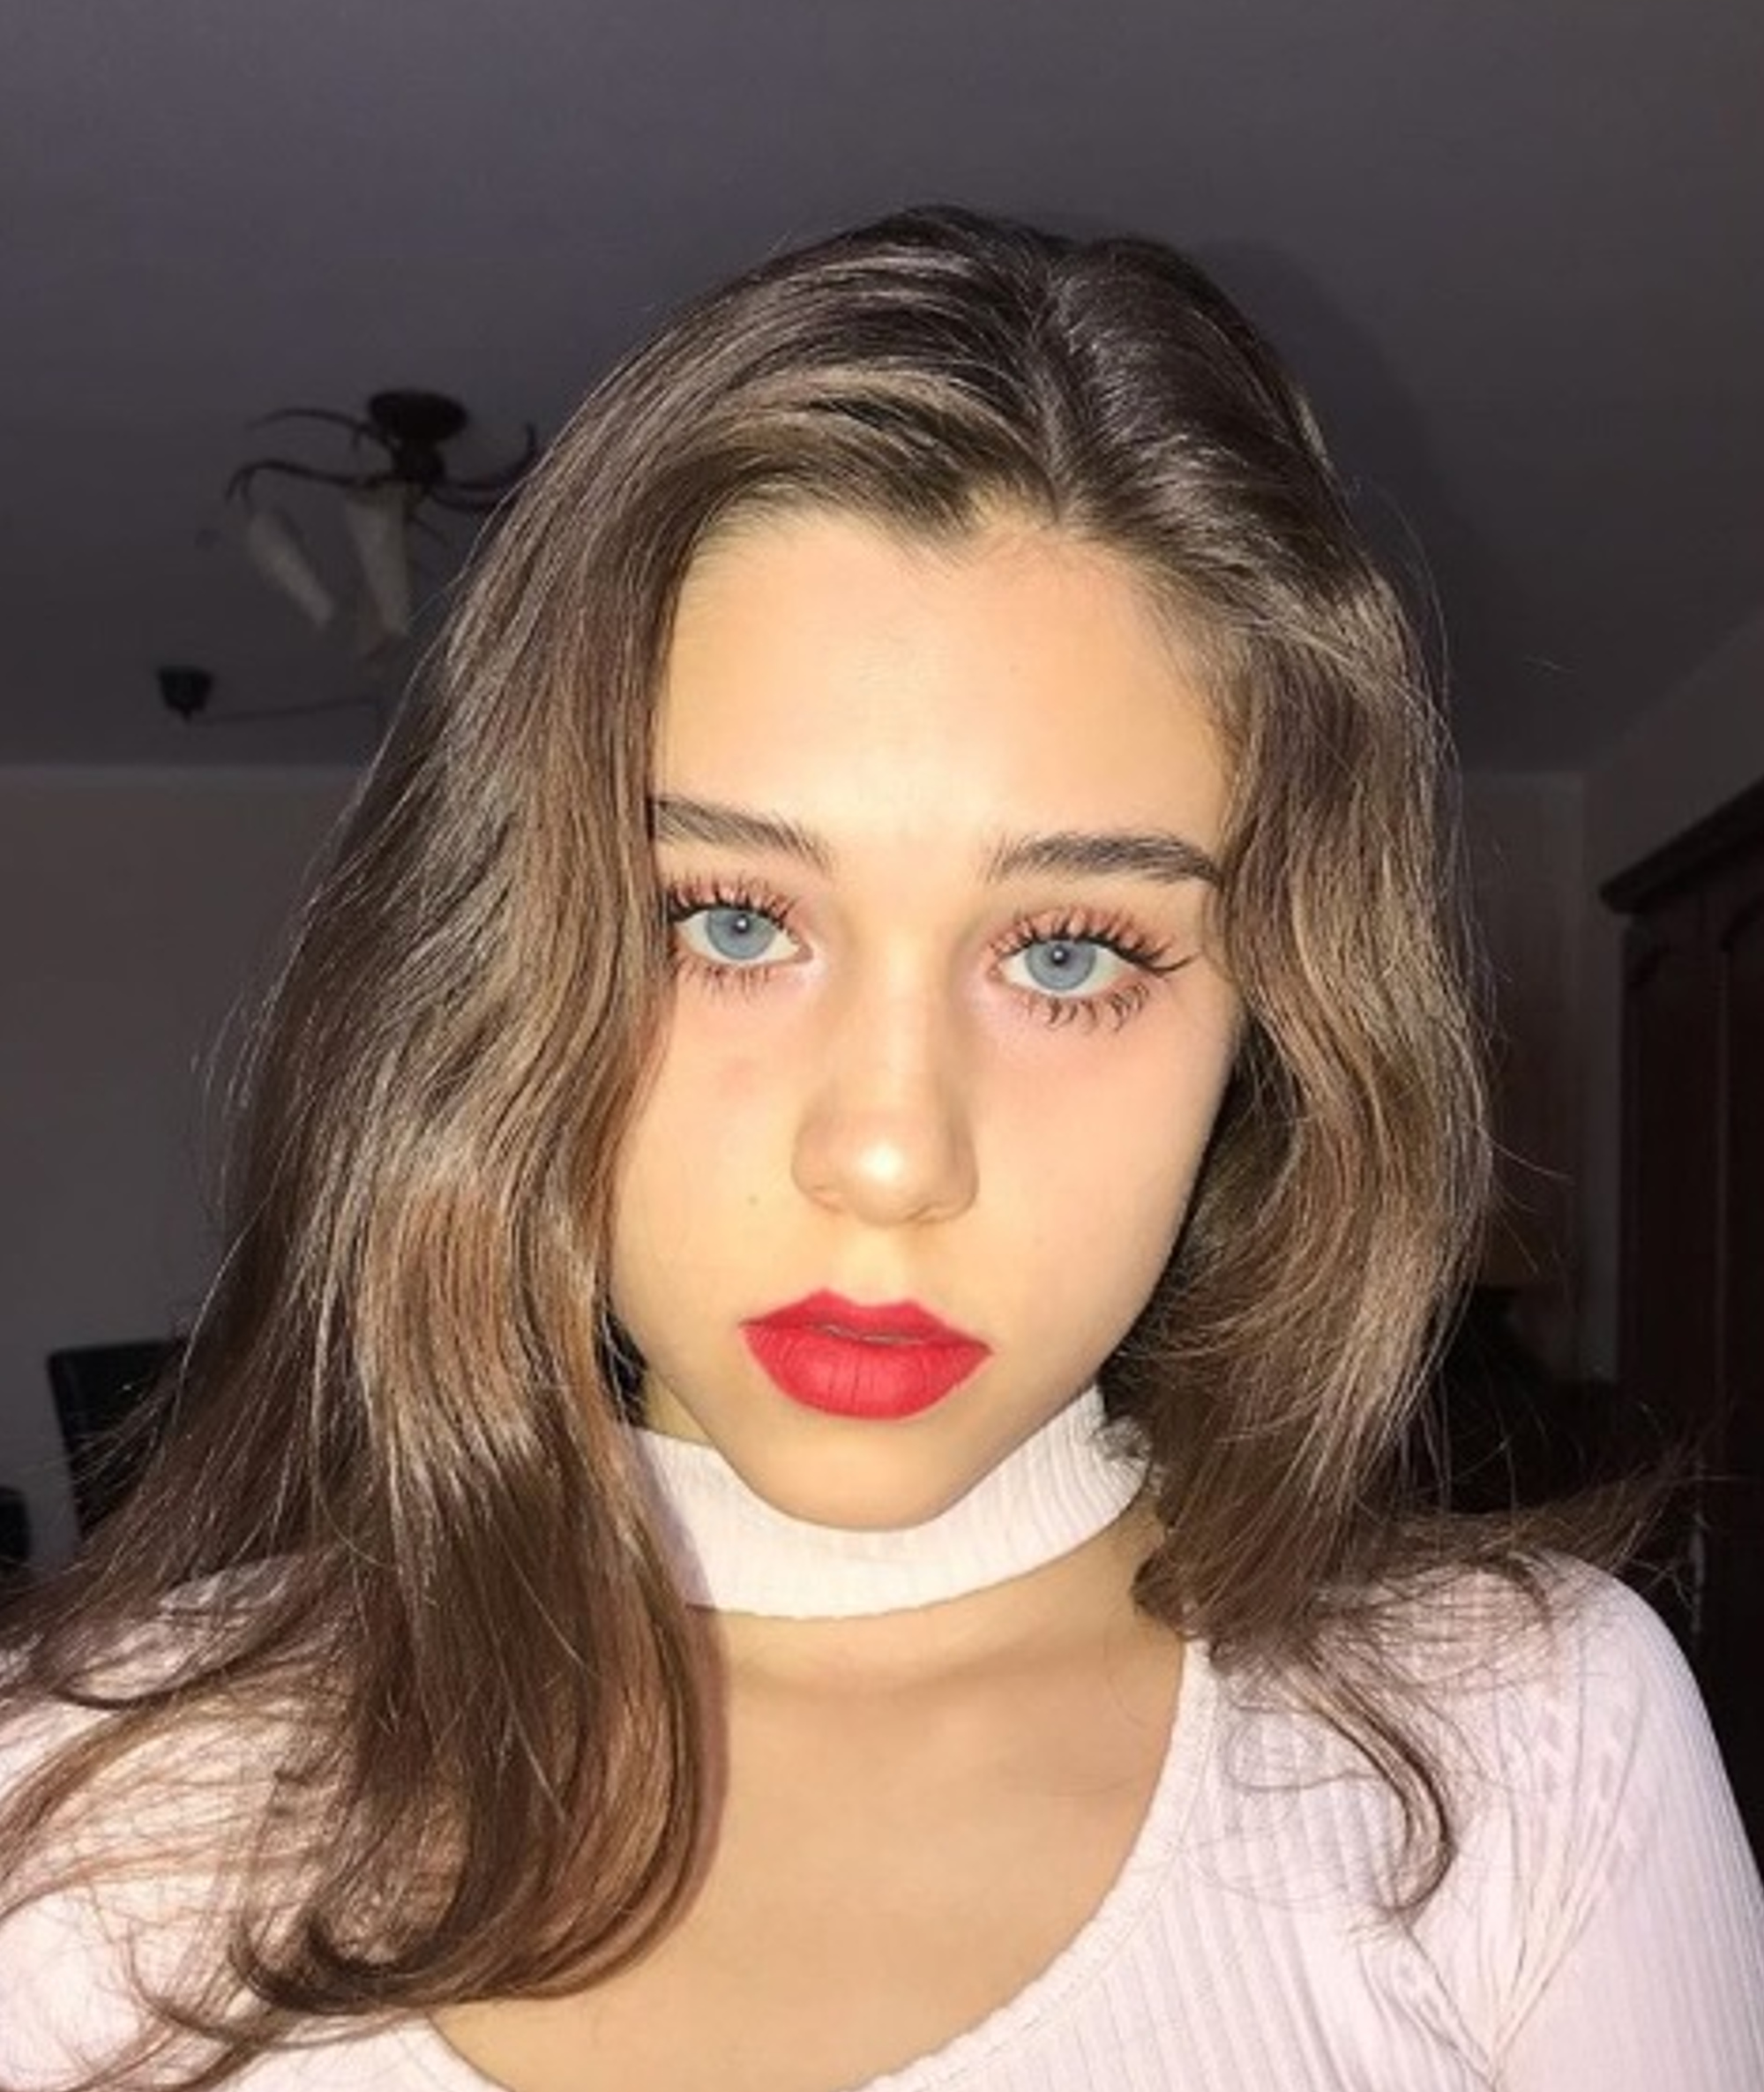 Read more about the article Polish Teen Crowned Queen Of TikTok With 8.5M Fans